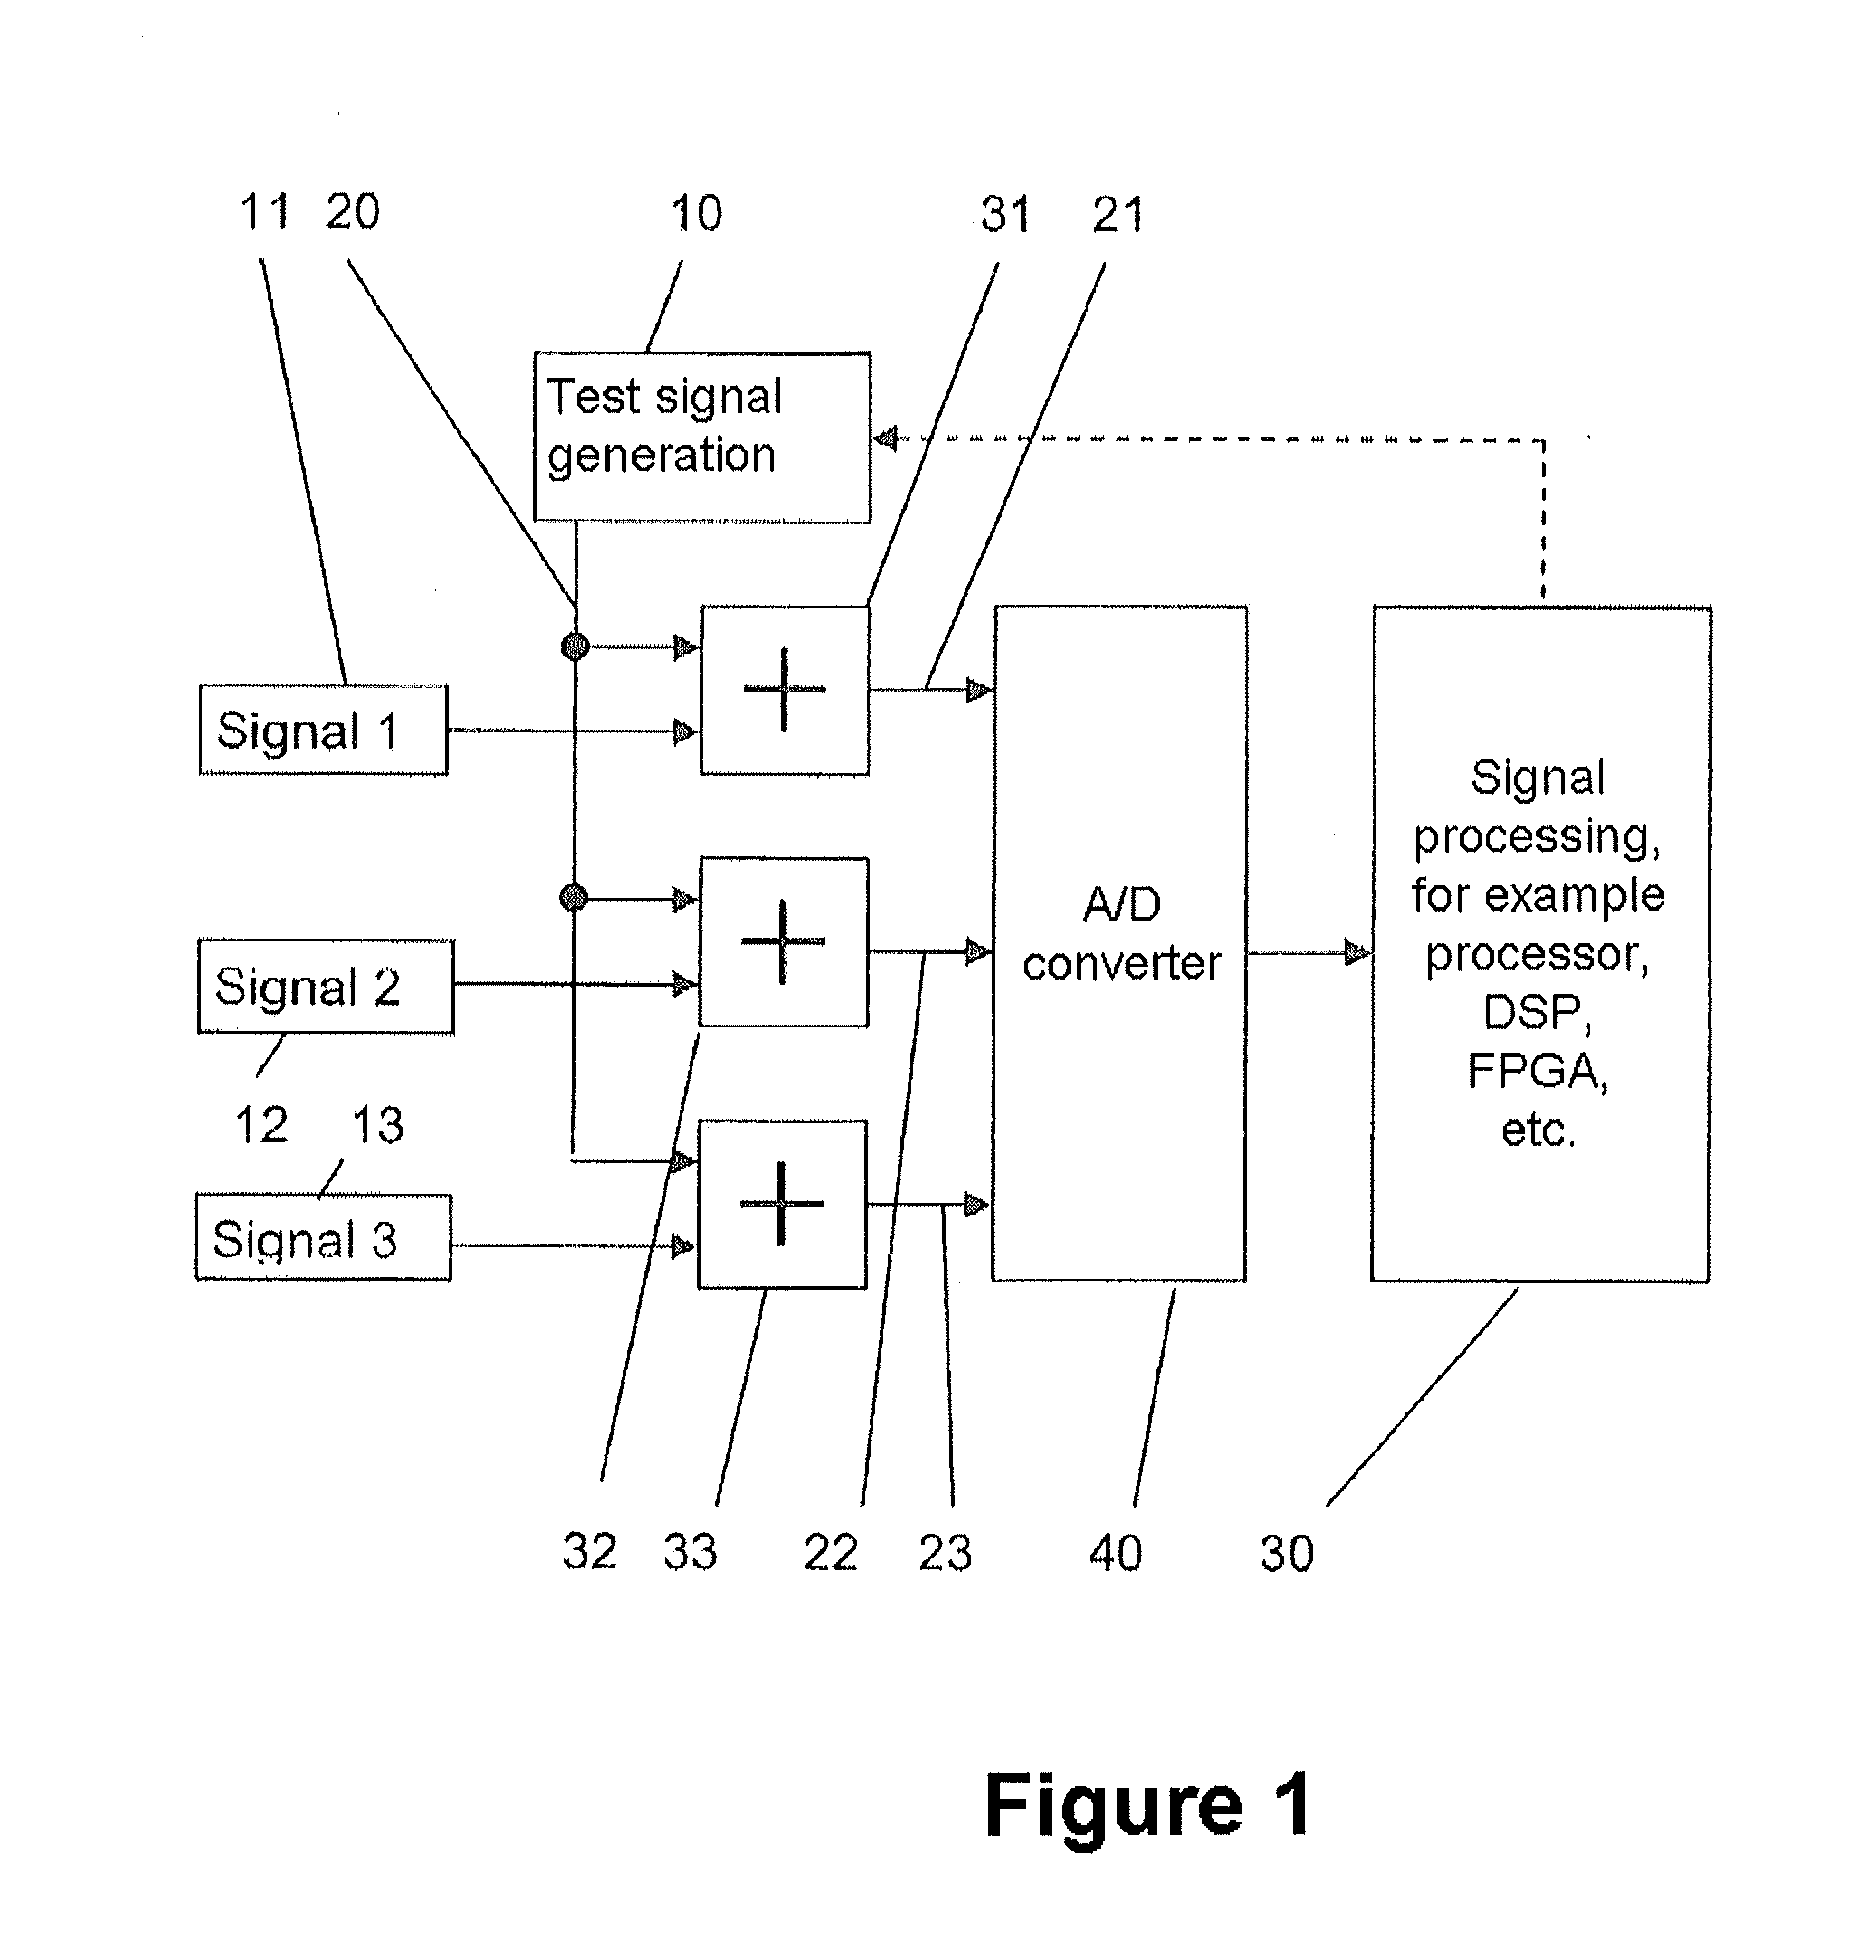 Method for determination of the time of flight of the signals in the signal paths of a coriolis flow meter